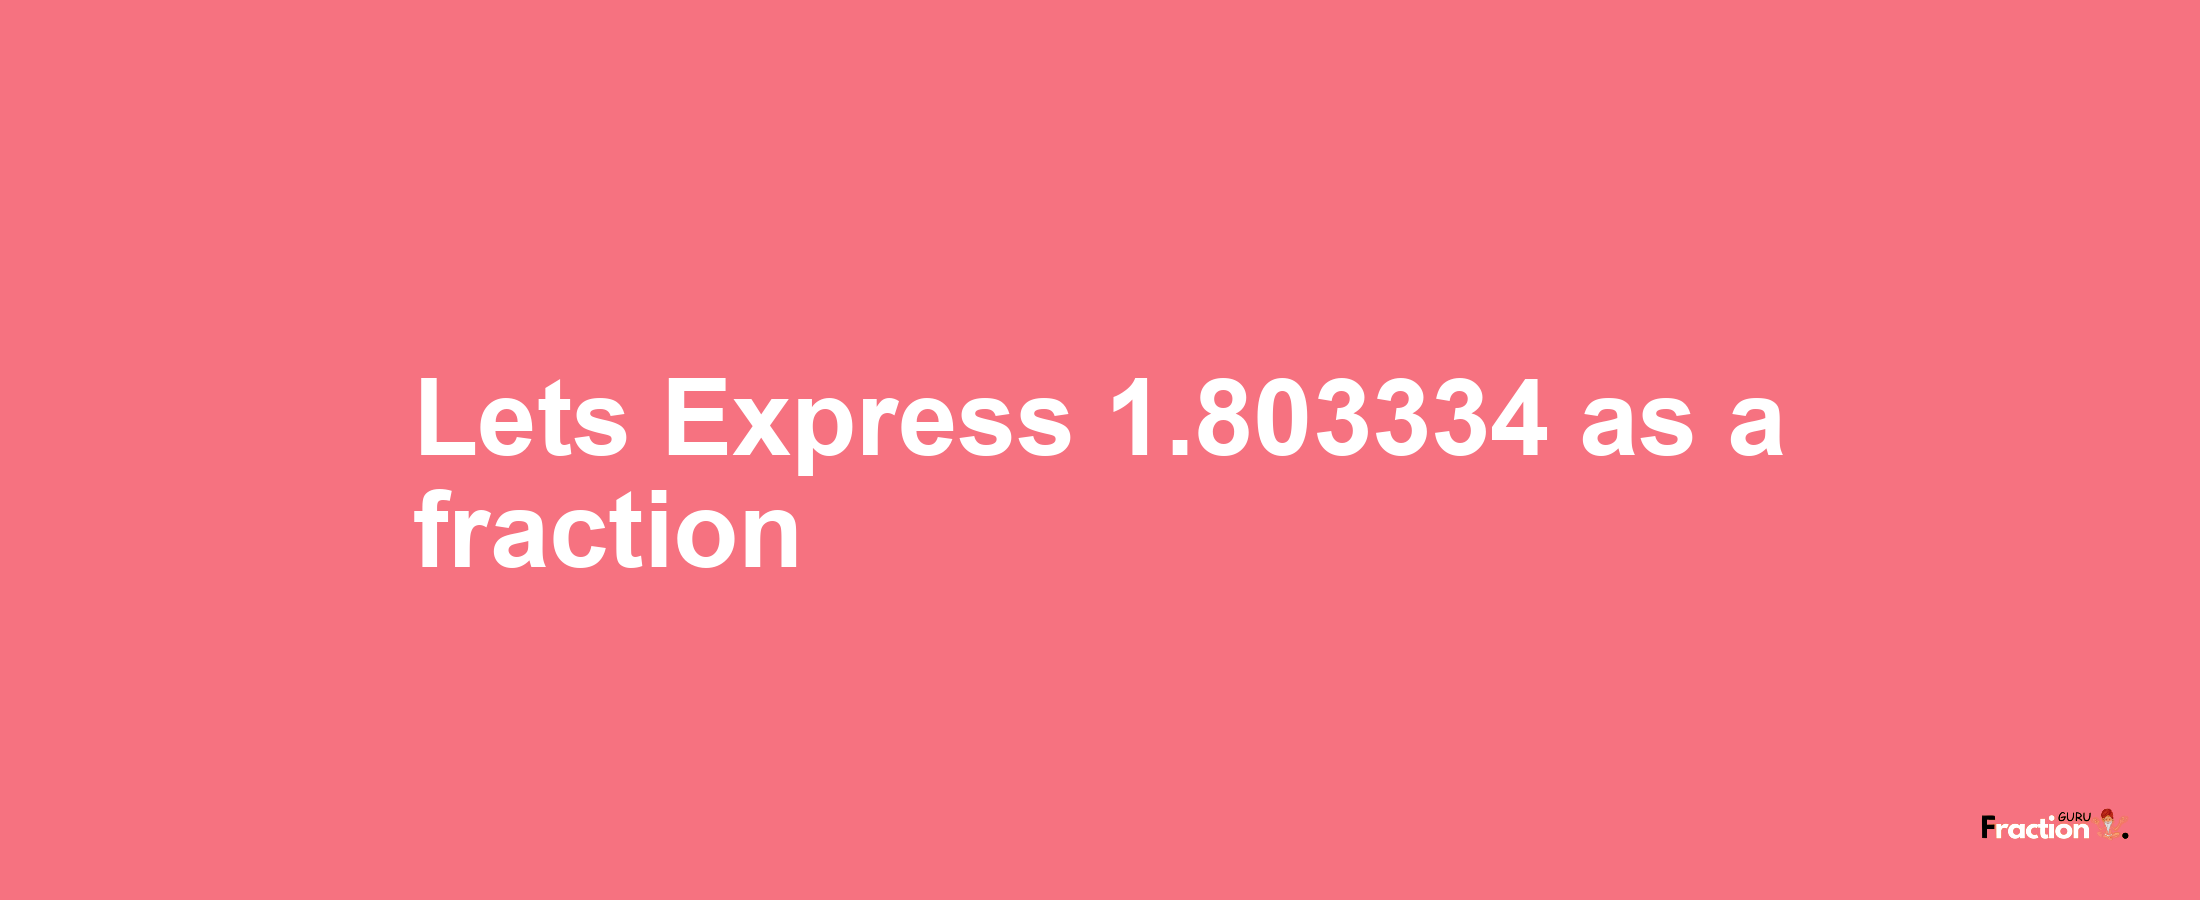 Lets Express 1.803334 as afraction